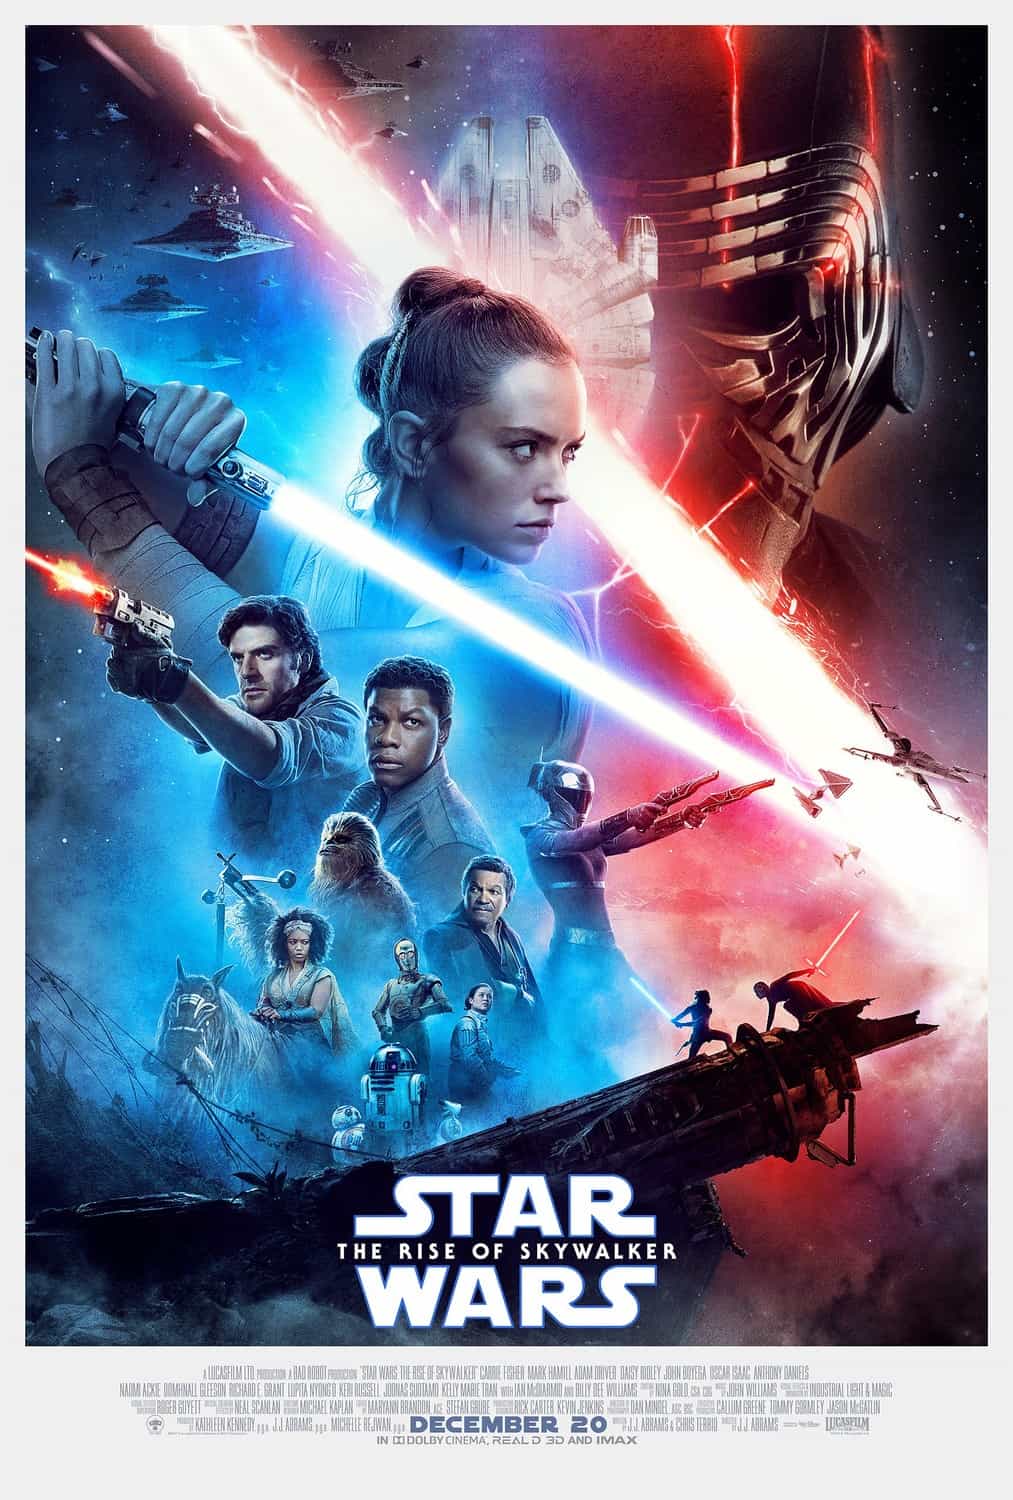 Star Wars The Rise Of Skywalker - official title announced of Episode IX at Star Wars Celebration